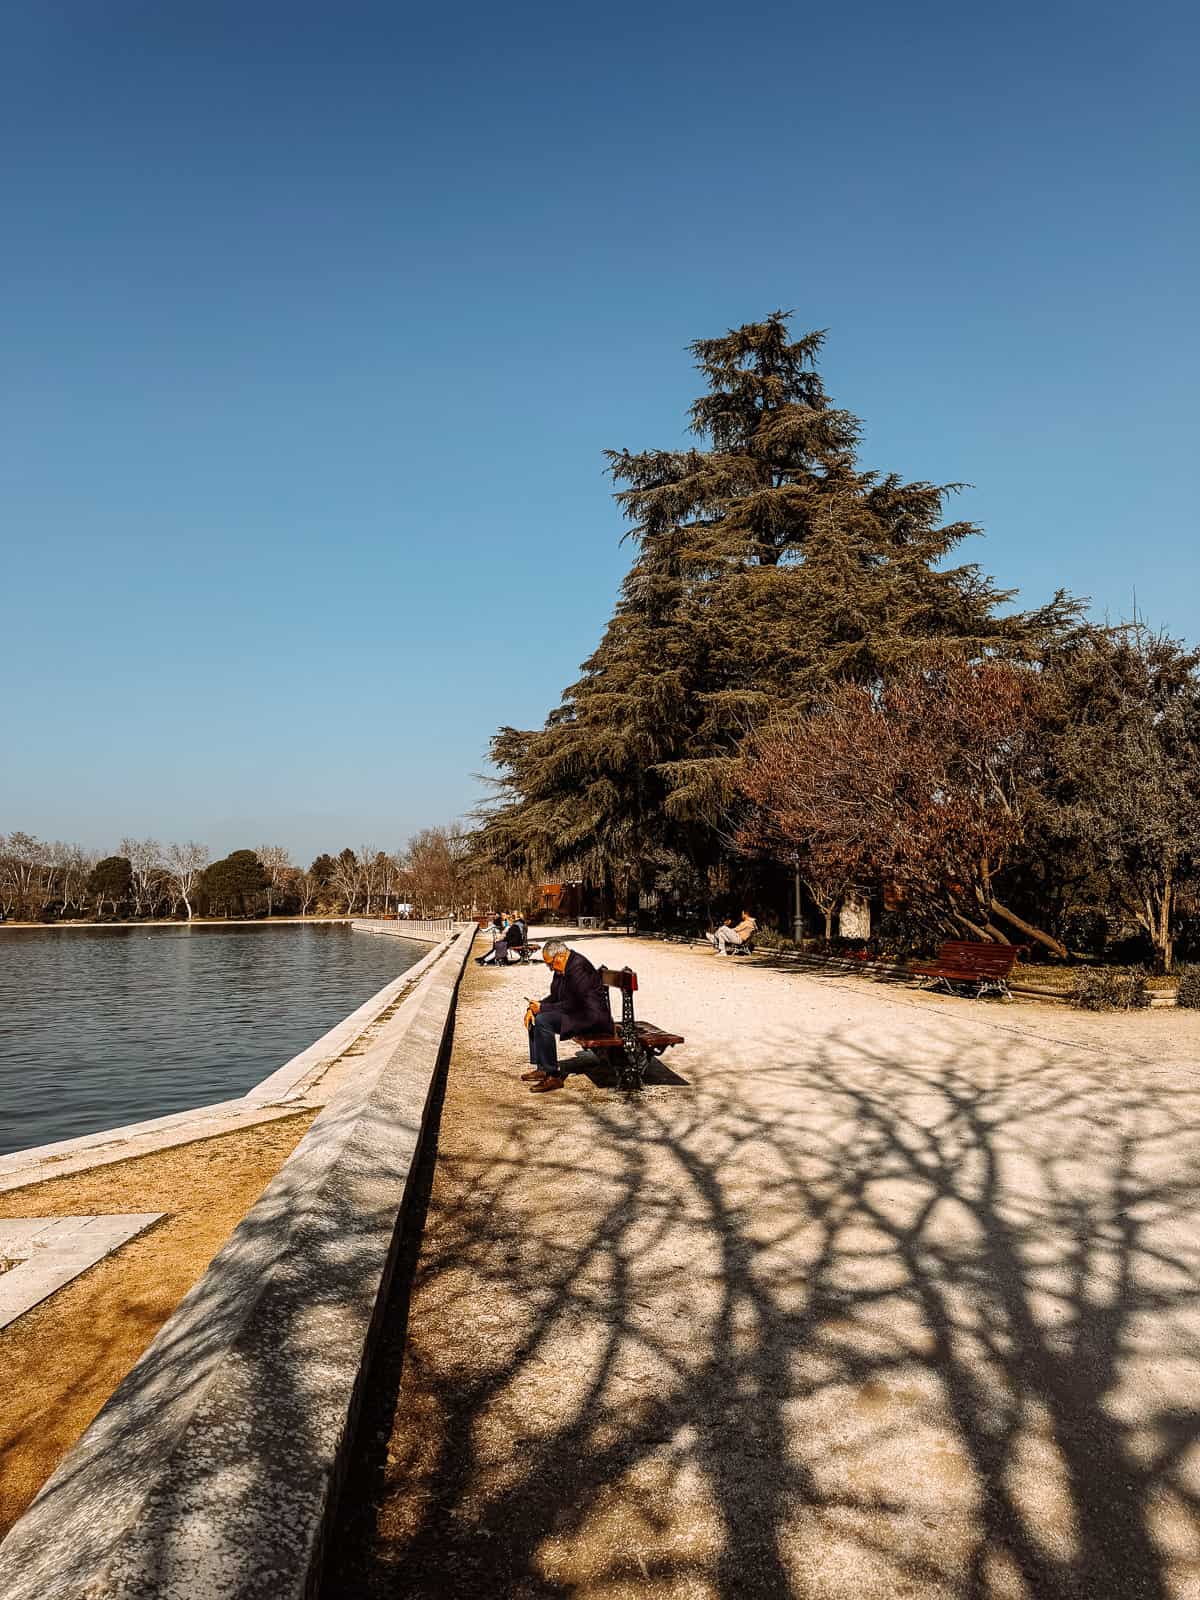 Individuals relax on benches along a serene lakeside promenade, overshadowed by a mature conifer and the clear blue sky, while the tranquility of the setting is mirrored in the still lake waters.